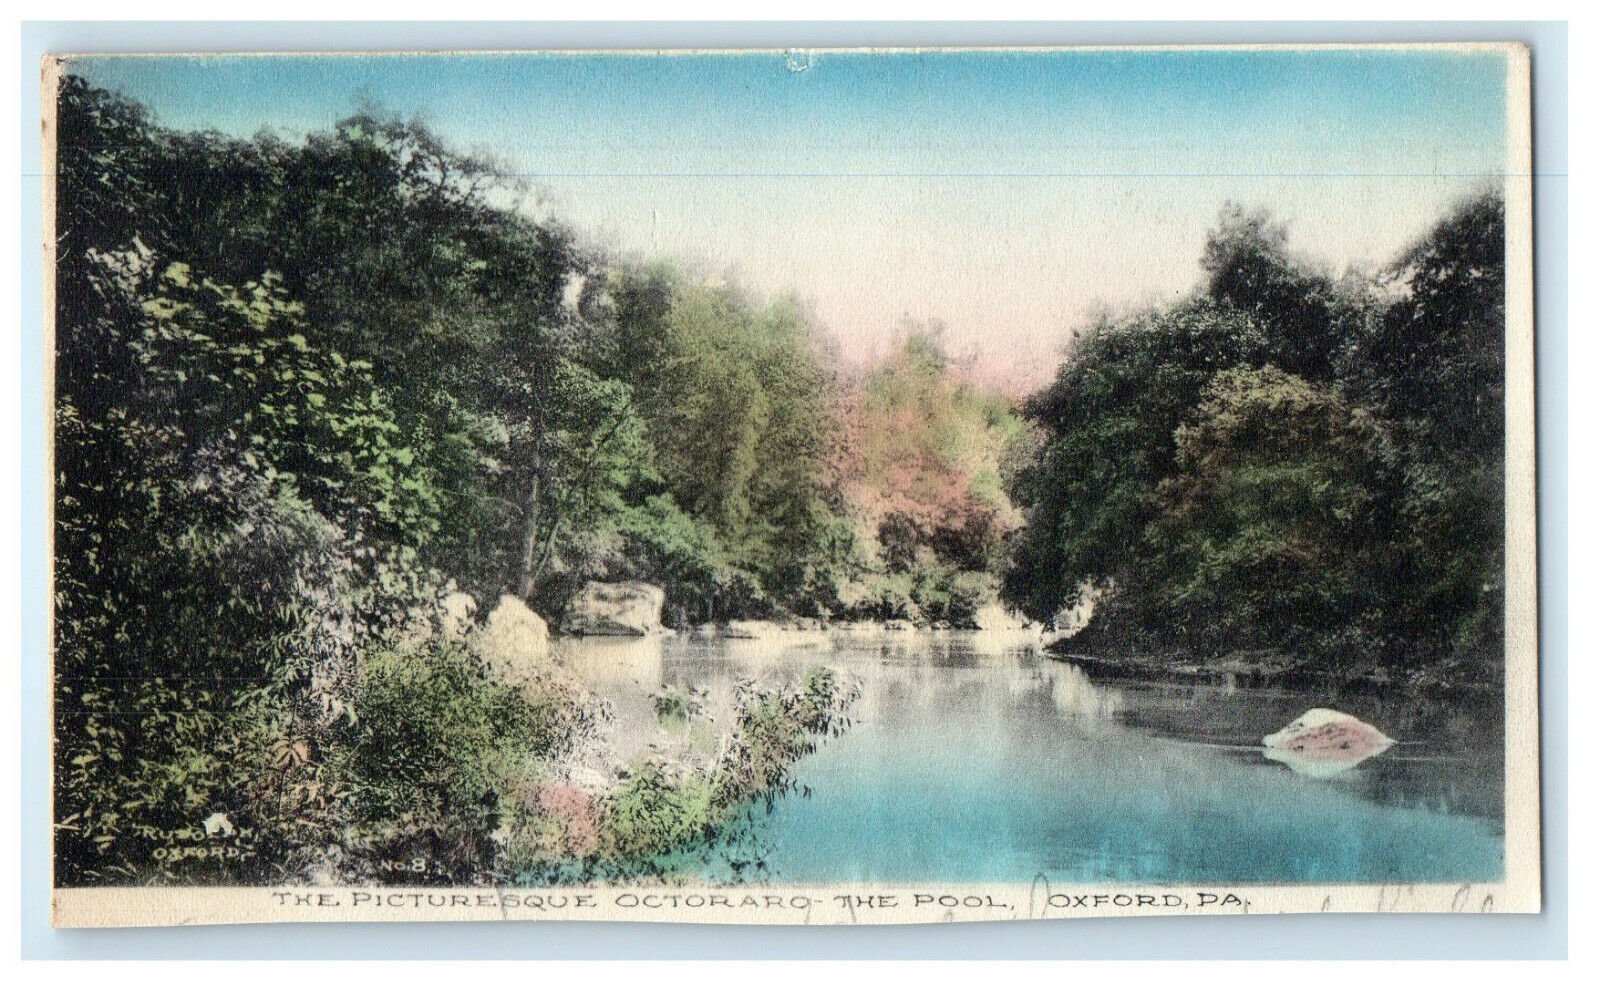 1908 Buck Hill Falls, PA The Picturesque Octoraro - The Pool Oxford PA Postcard